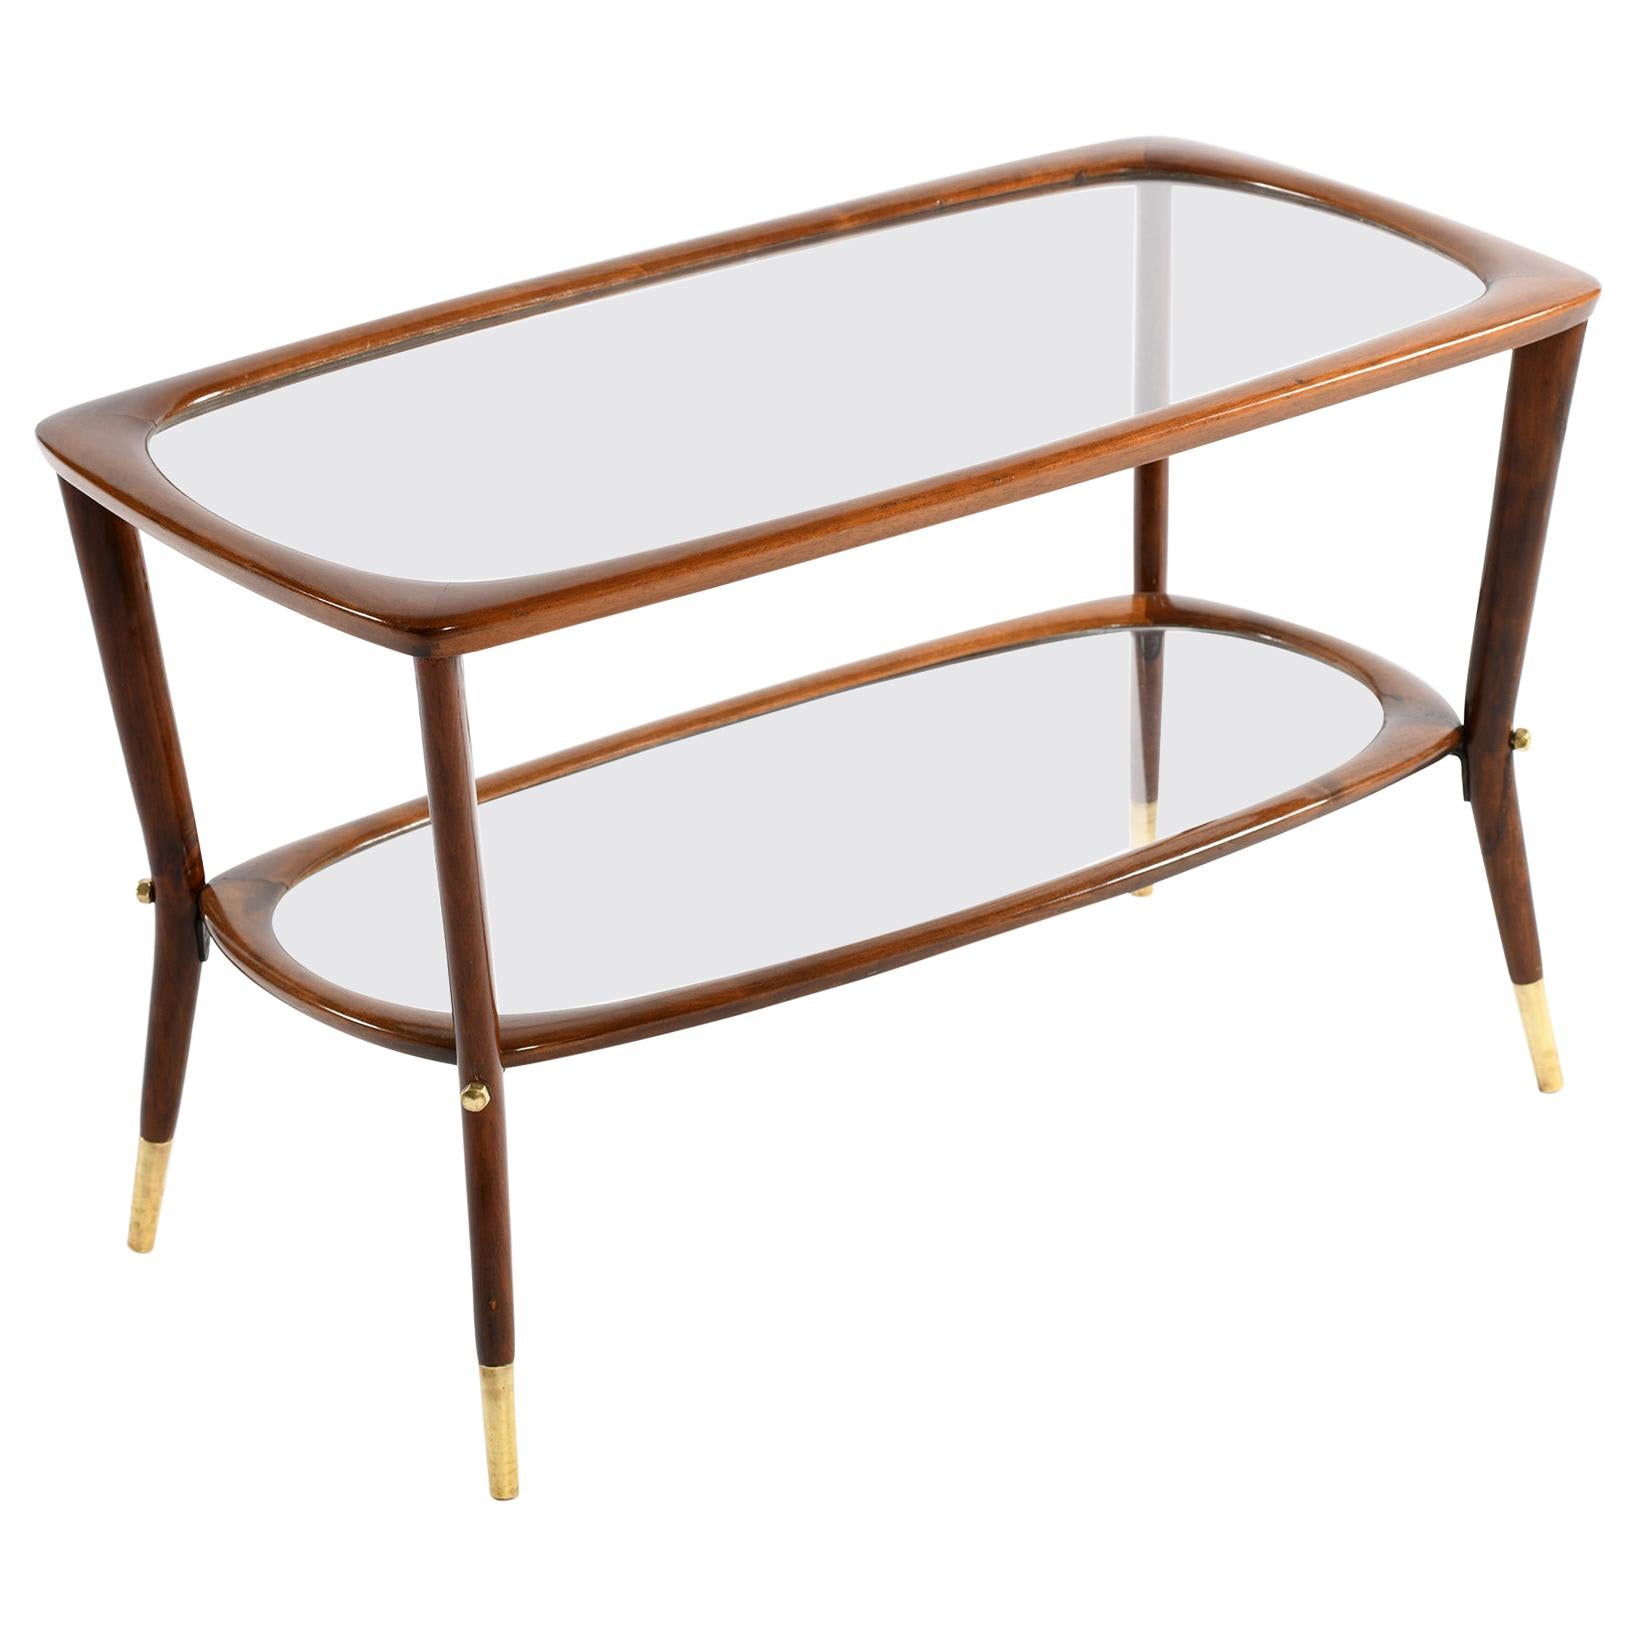 Midcentury Italian Coffee Table with Double Glass Shelf and Brass Details